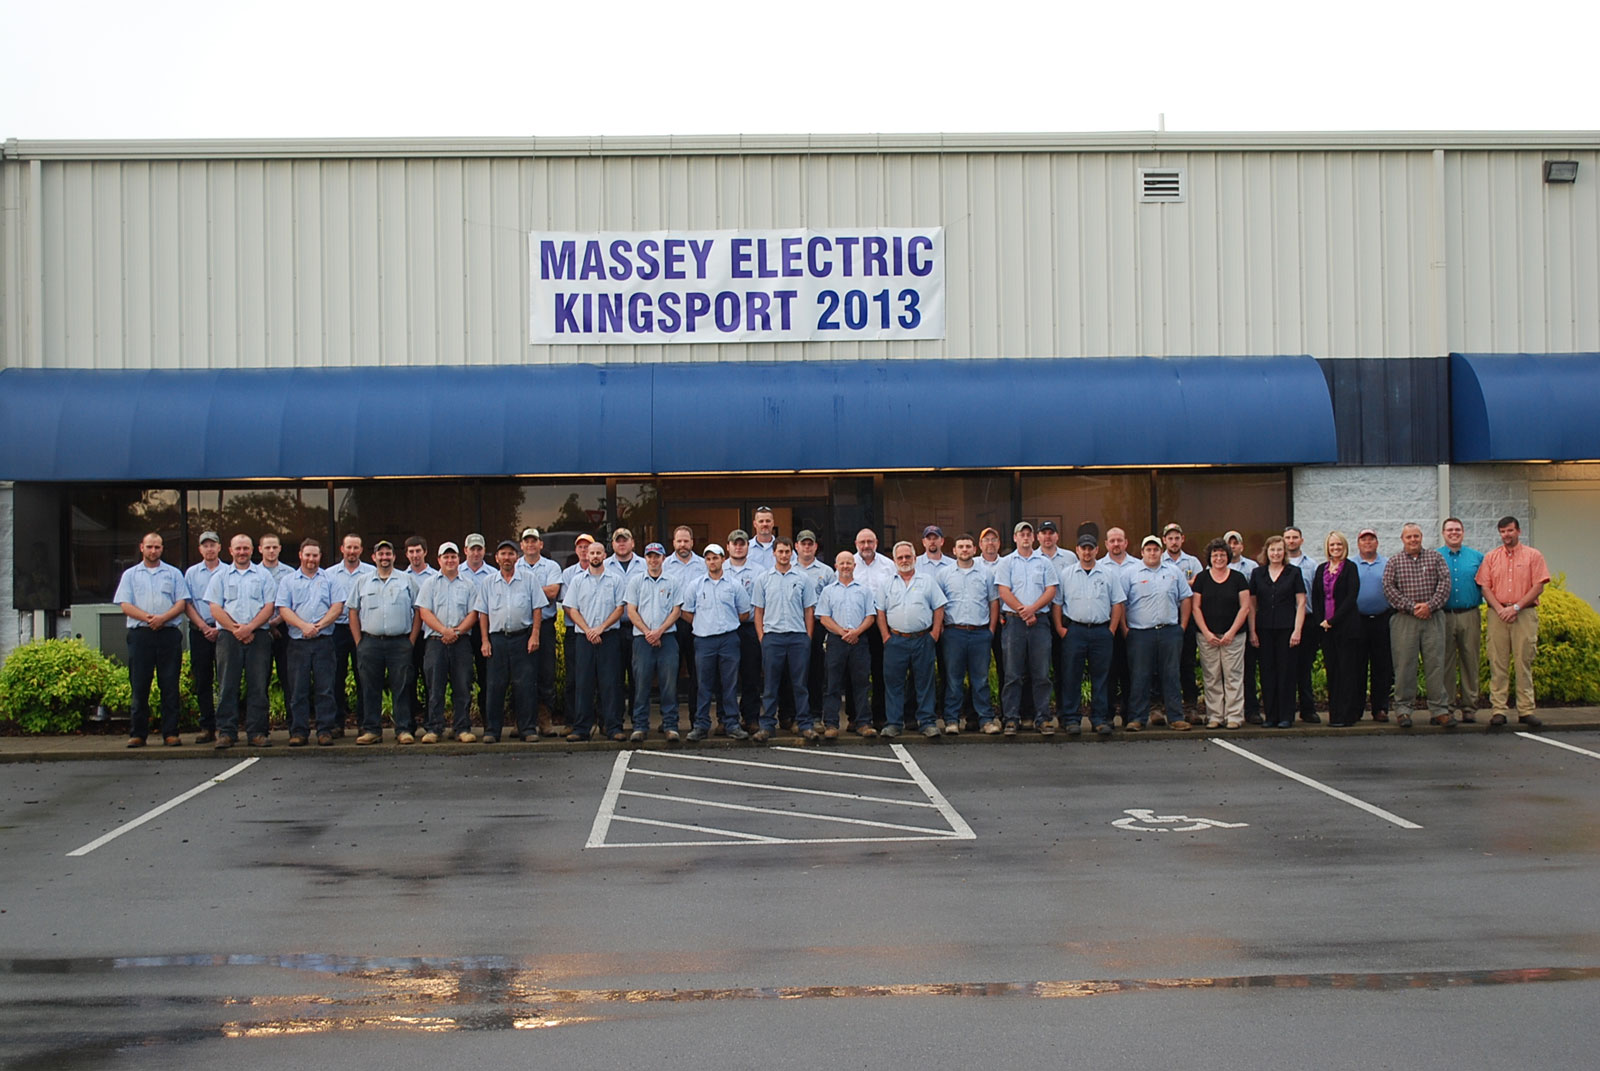 Massey Electric Kingsport 2013 devision